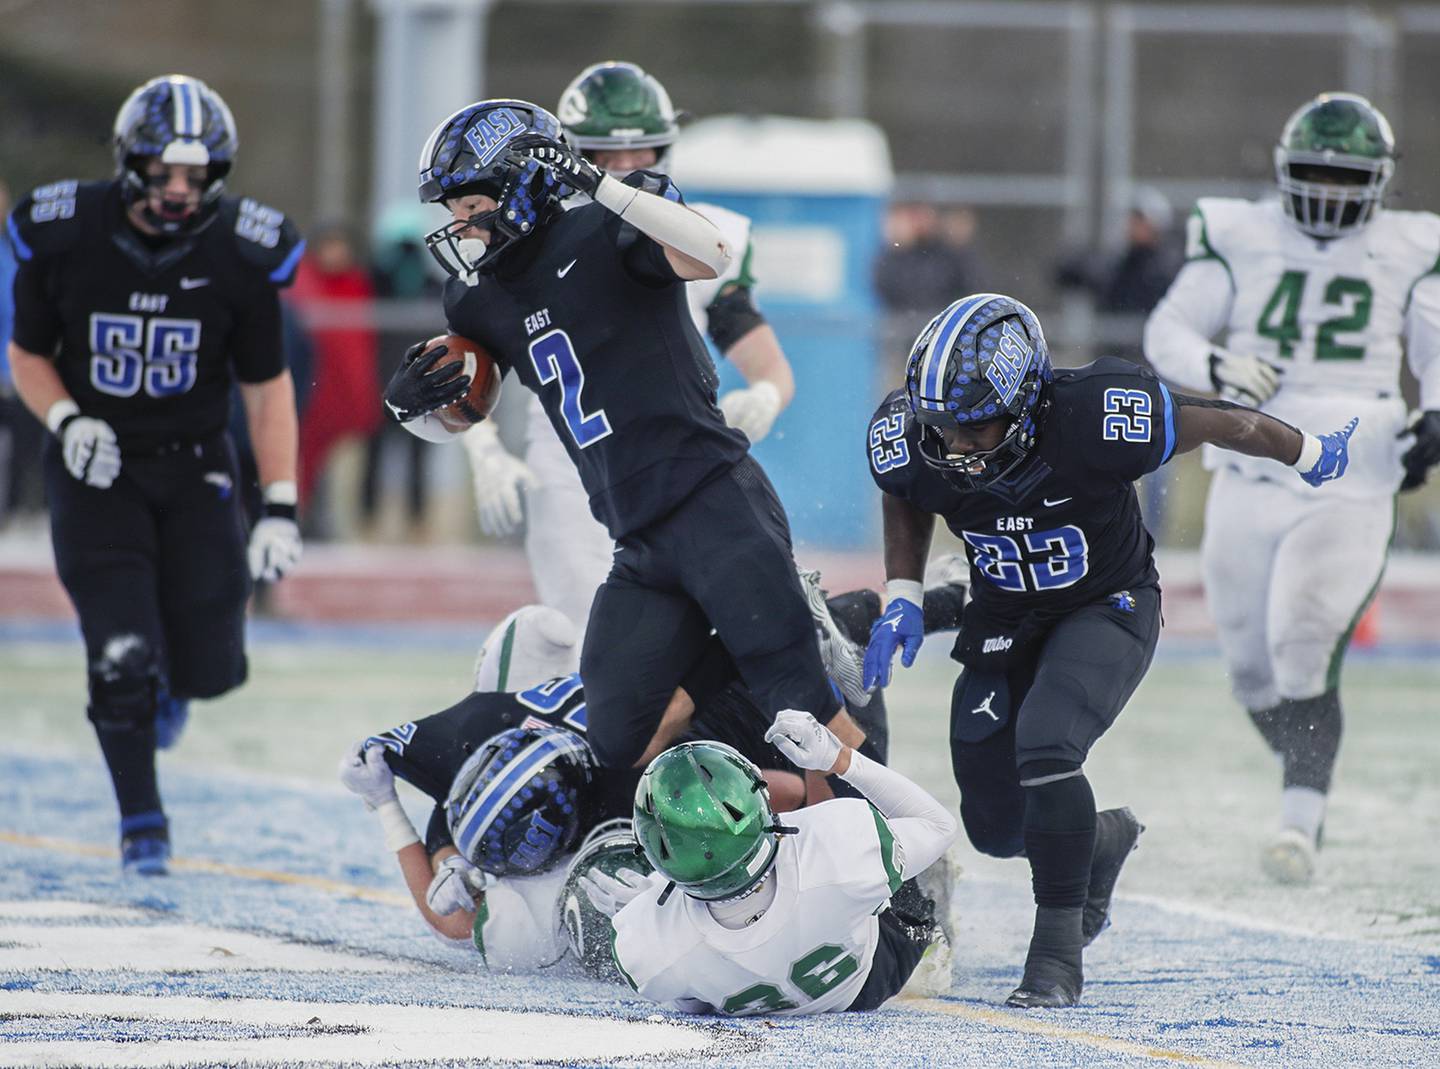 Lincoln-Way East’s James Kwiecinski (2) scores a touchdown against Glenbard West during a Class 8A state semifinal game in Frankfort on Saturday, Nov. 19, 2022.